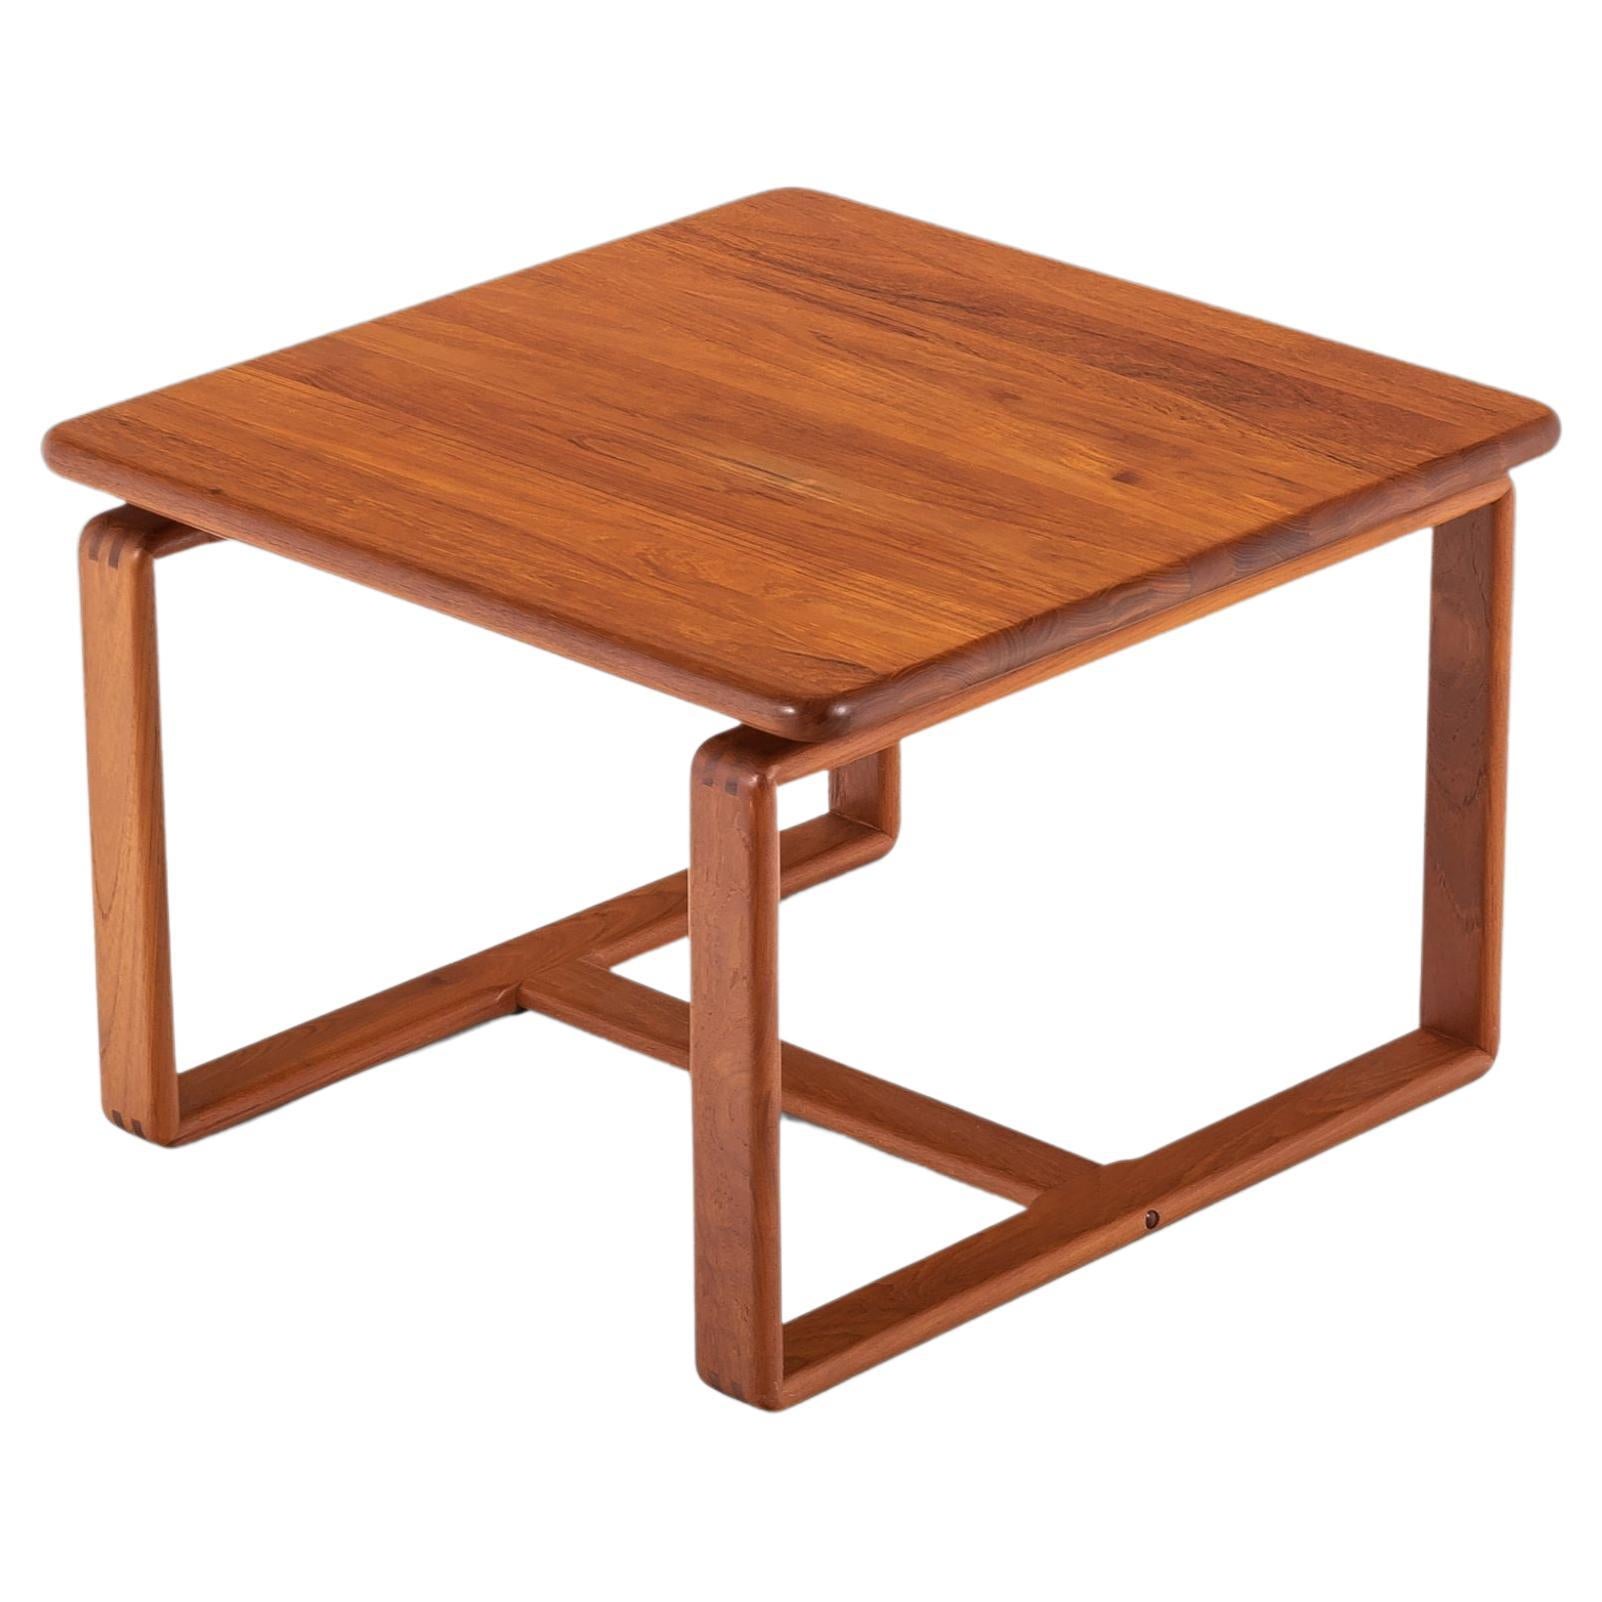 Mid-Century Modern Solid Teak Coffee Table, c. 1970's For Sale